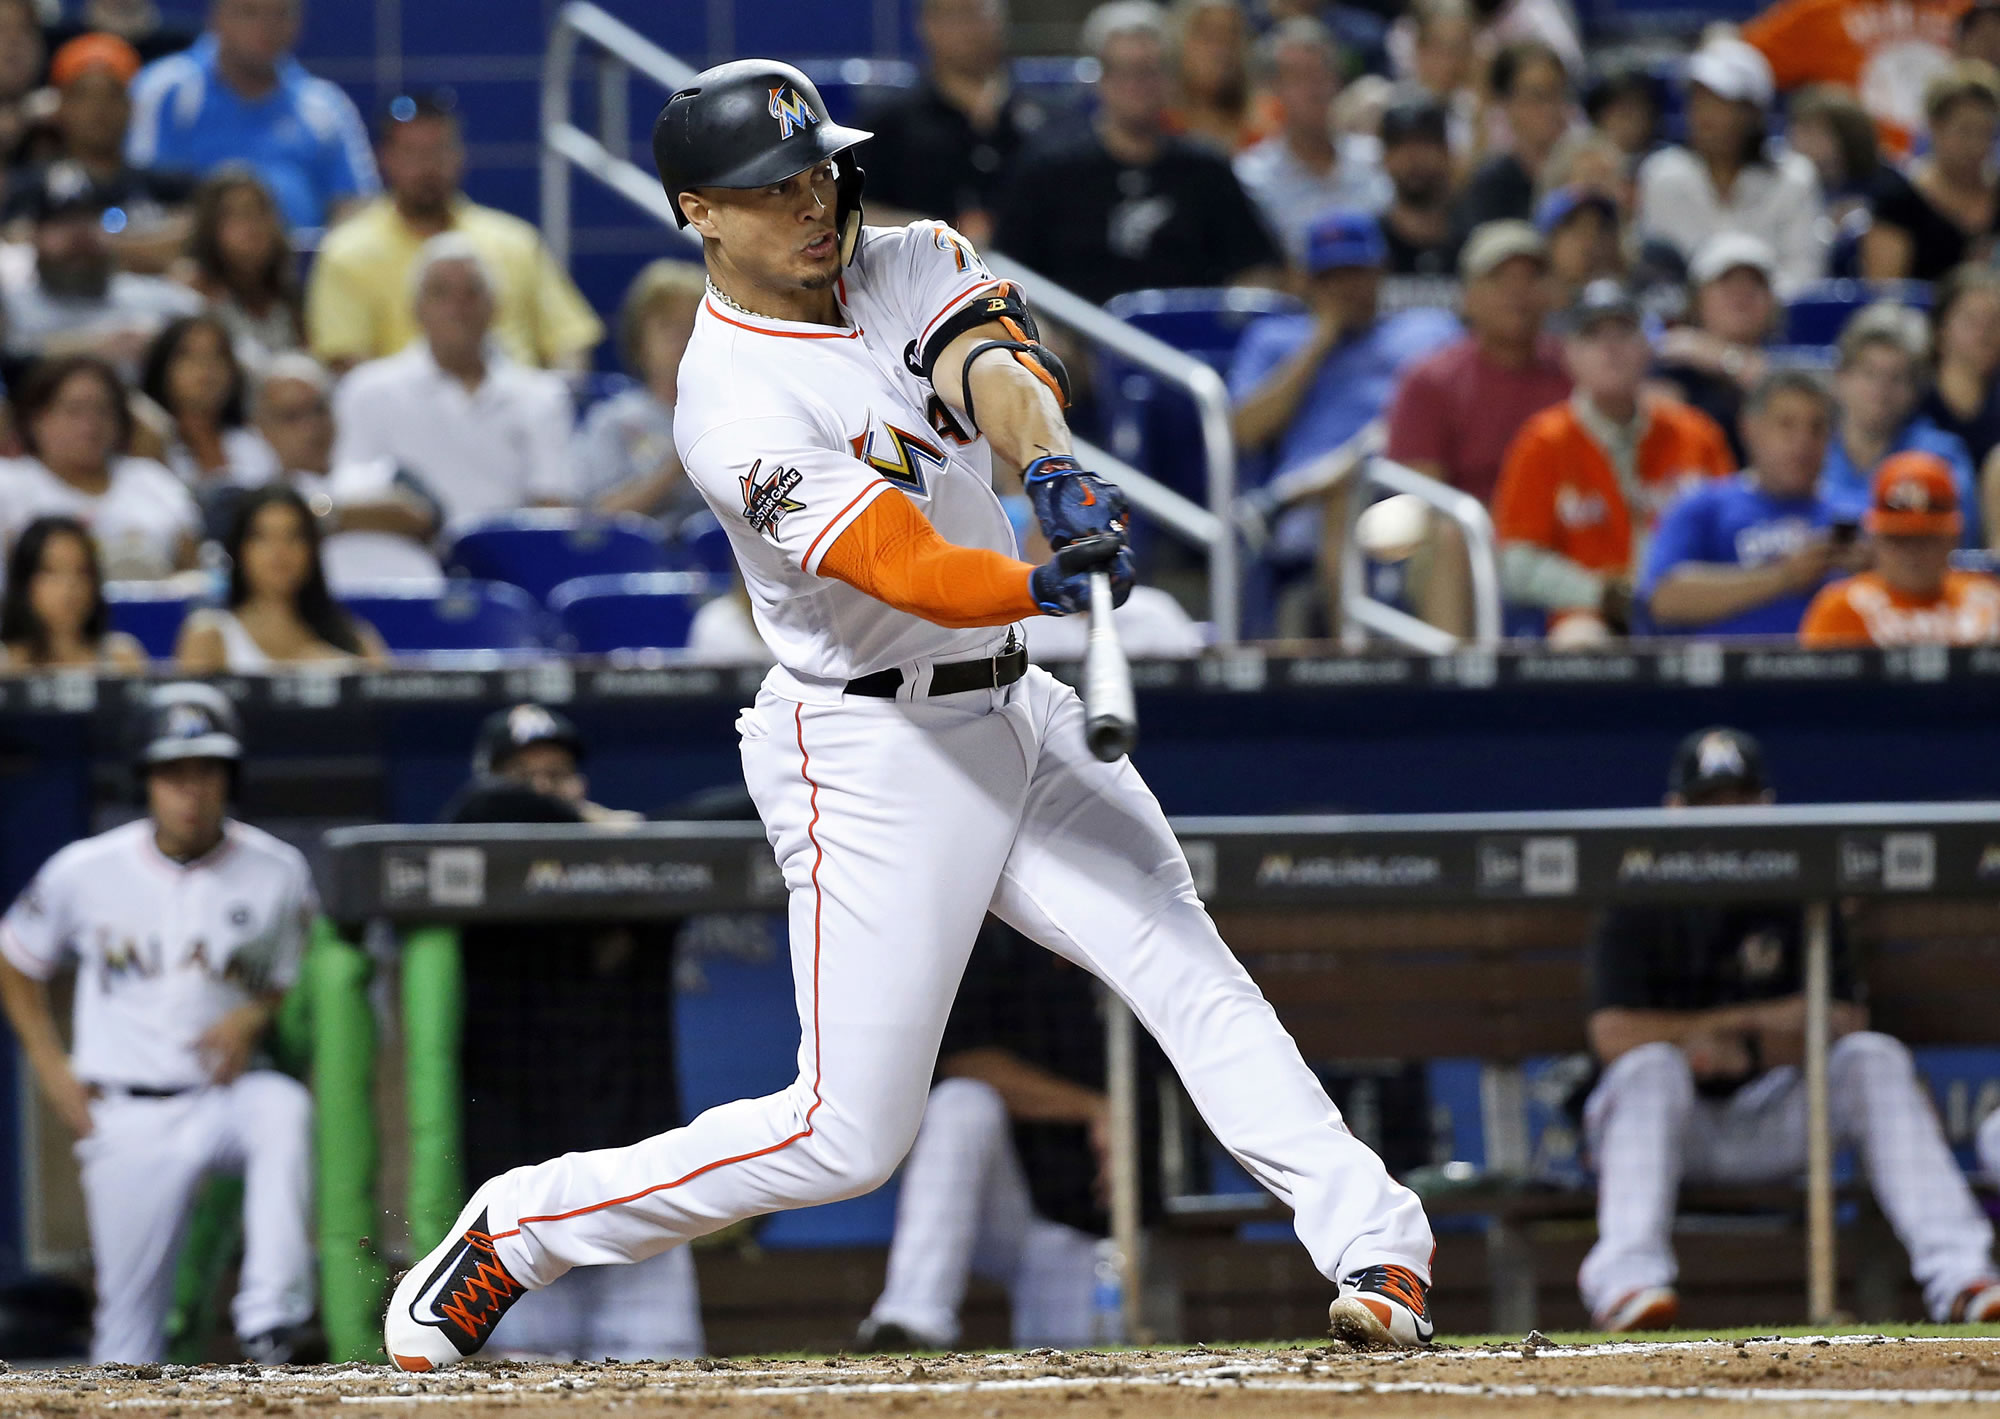 A person familiar with the negotiations says the New York Yankees and Miami Marlins are working on a trade that would send slugger Giancarlo Stanton to New York and infielder Starlin Castro to Miami.  The person spoke to The Associated Press on condition of anonymity Saturday, Dec. 9, 2017, because no agreement has been completed.